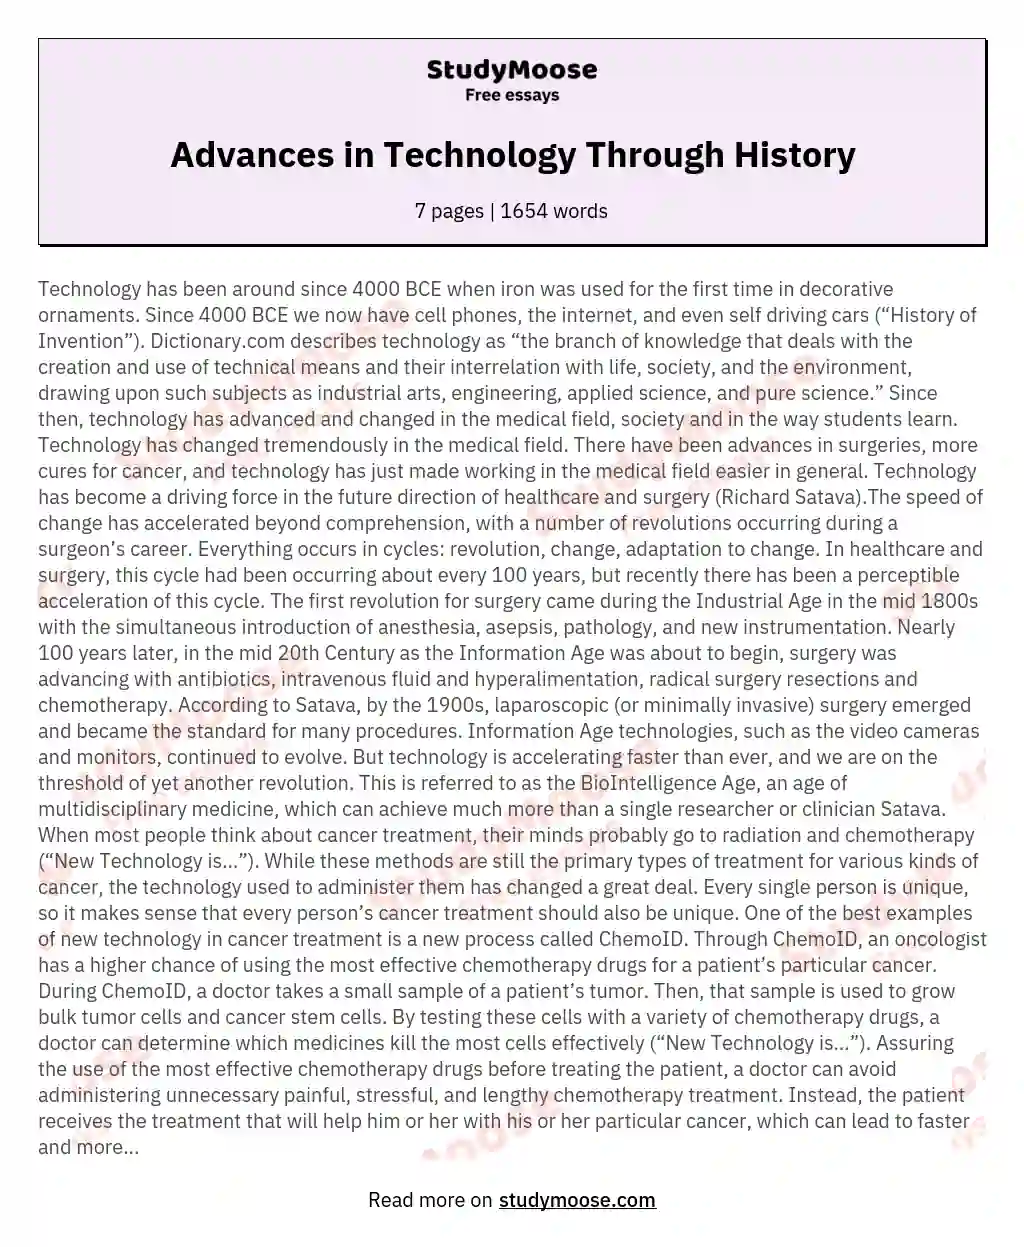 Advances in Technology Through History essay